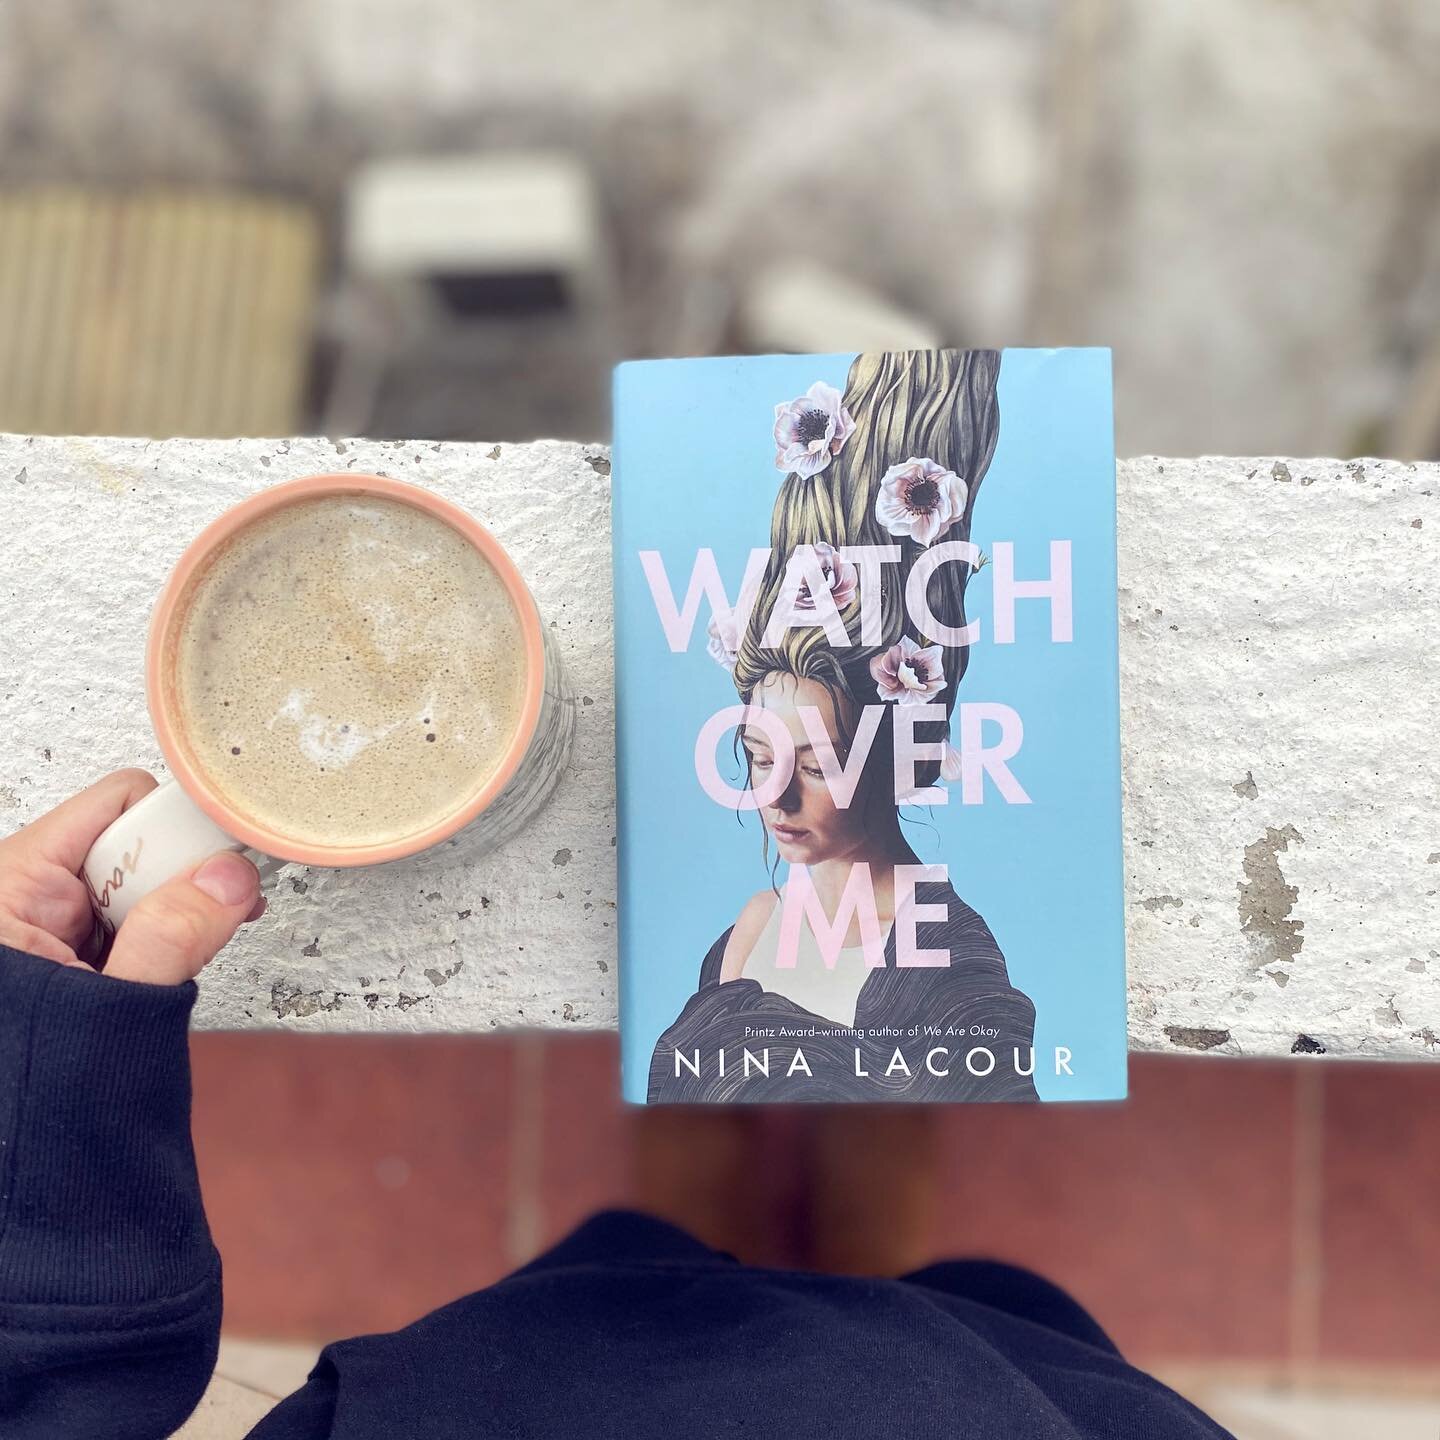 I looked at Liz. She took a sip of her tea.
&ldquo;I was raised by wolves.&rdquo; She turned to me and smiled.
&ldquo;Funny,&rdquo; I said, smiling back. &ldquo;So was I.&rdquo;
&ndash; Watch Over Me by Nina LaCour. Cover art by Pippa Young; cover de